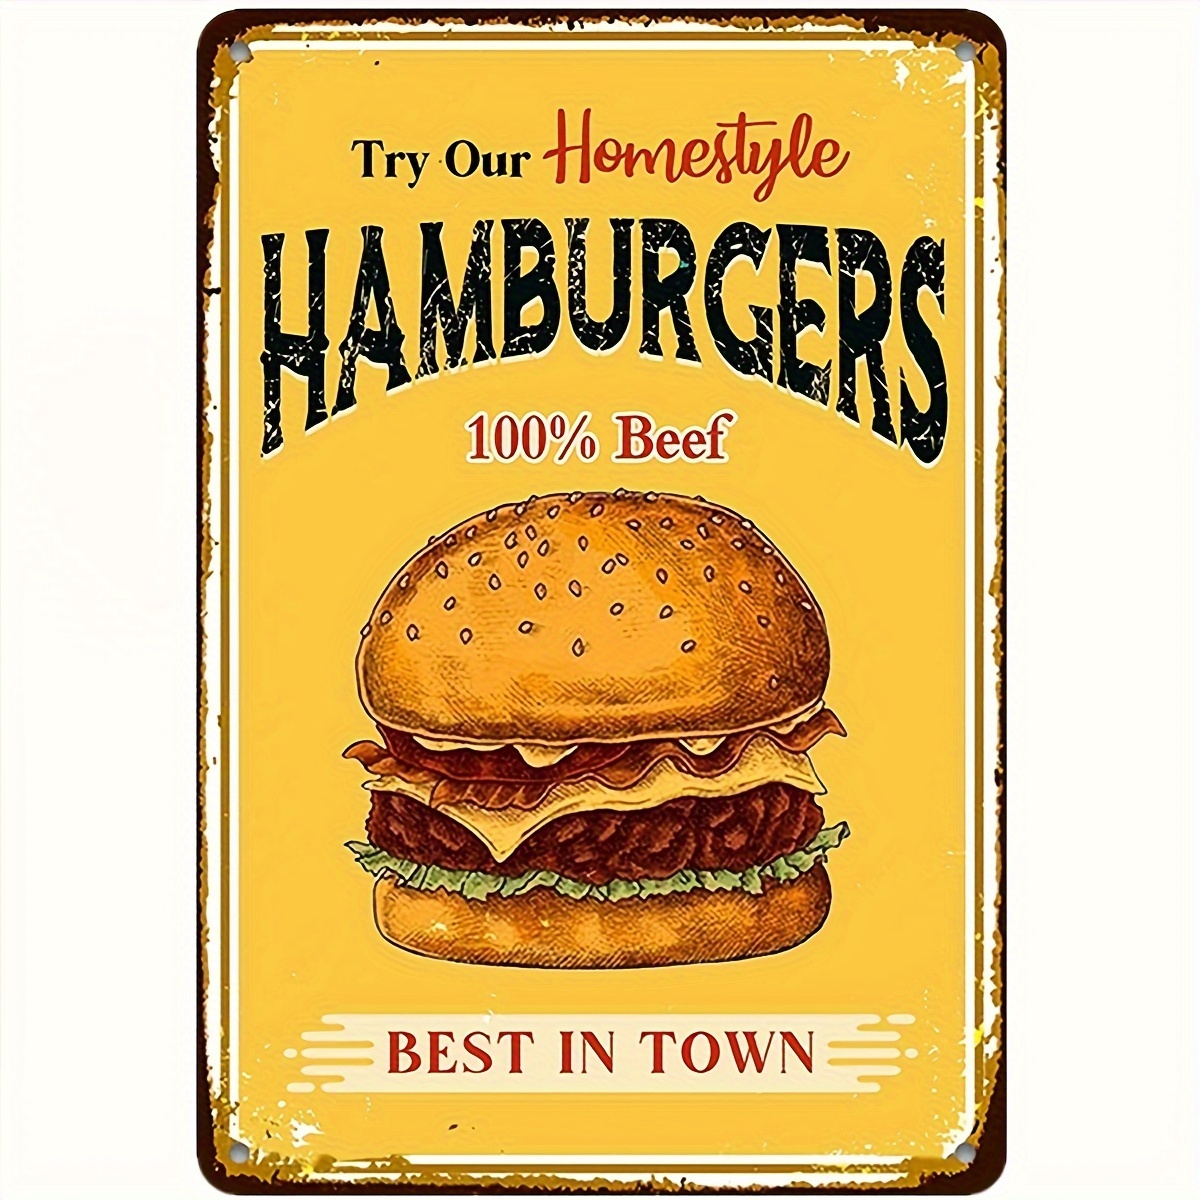 

Hamburgers Tin Sign, Try Our Homestyle Hamburgers Best In Town Vintage Metal Tin Sign For Men Women, Wall Decor For Bars, Restaurants, Cafes Pubs, 12x8 Inch